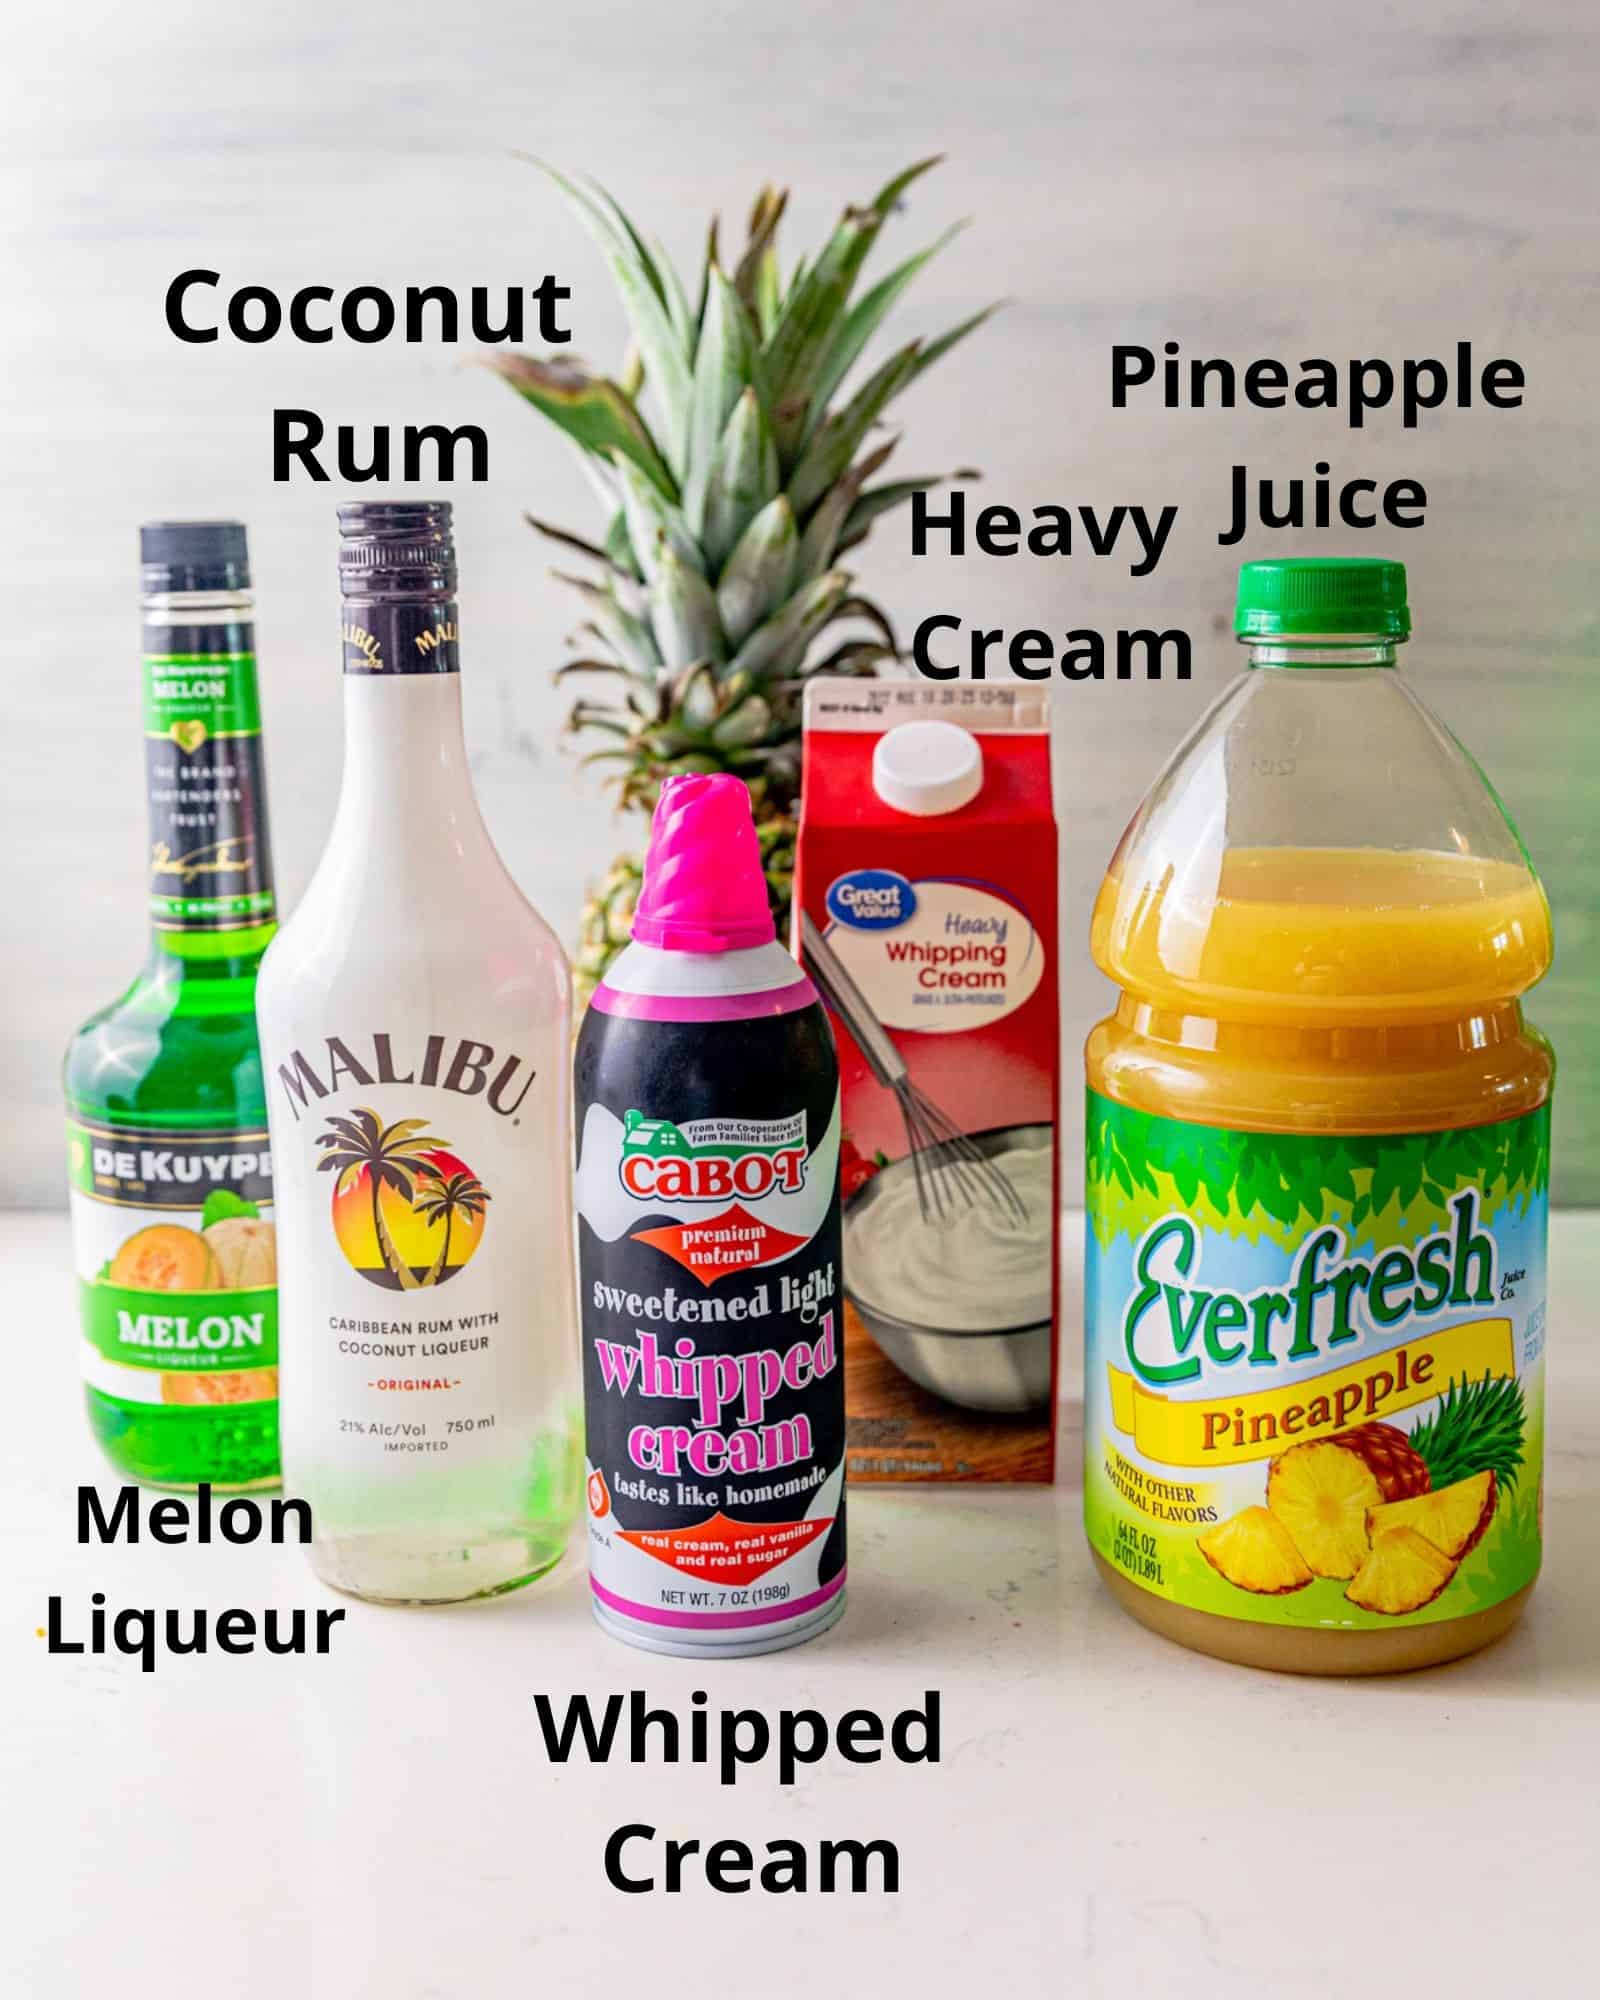 the ingredients to make a scooby snack shot - coconut rum, melon liqueur, heavy cream, pineapple juice, whipped cream.